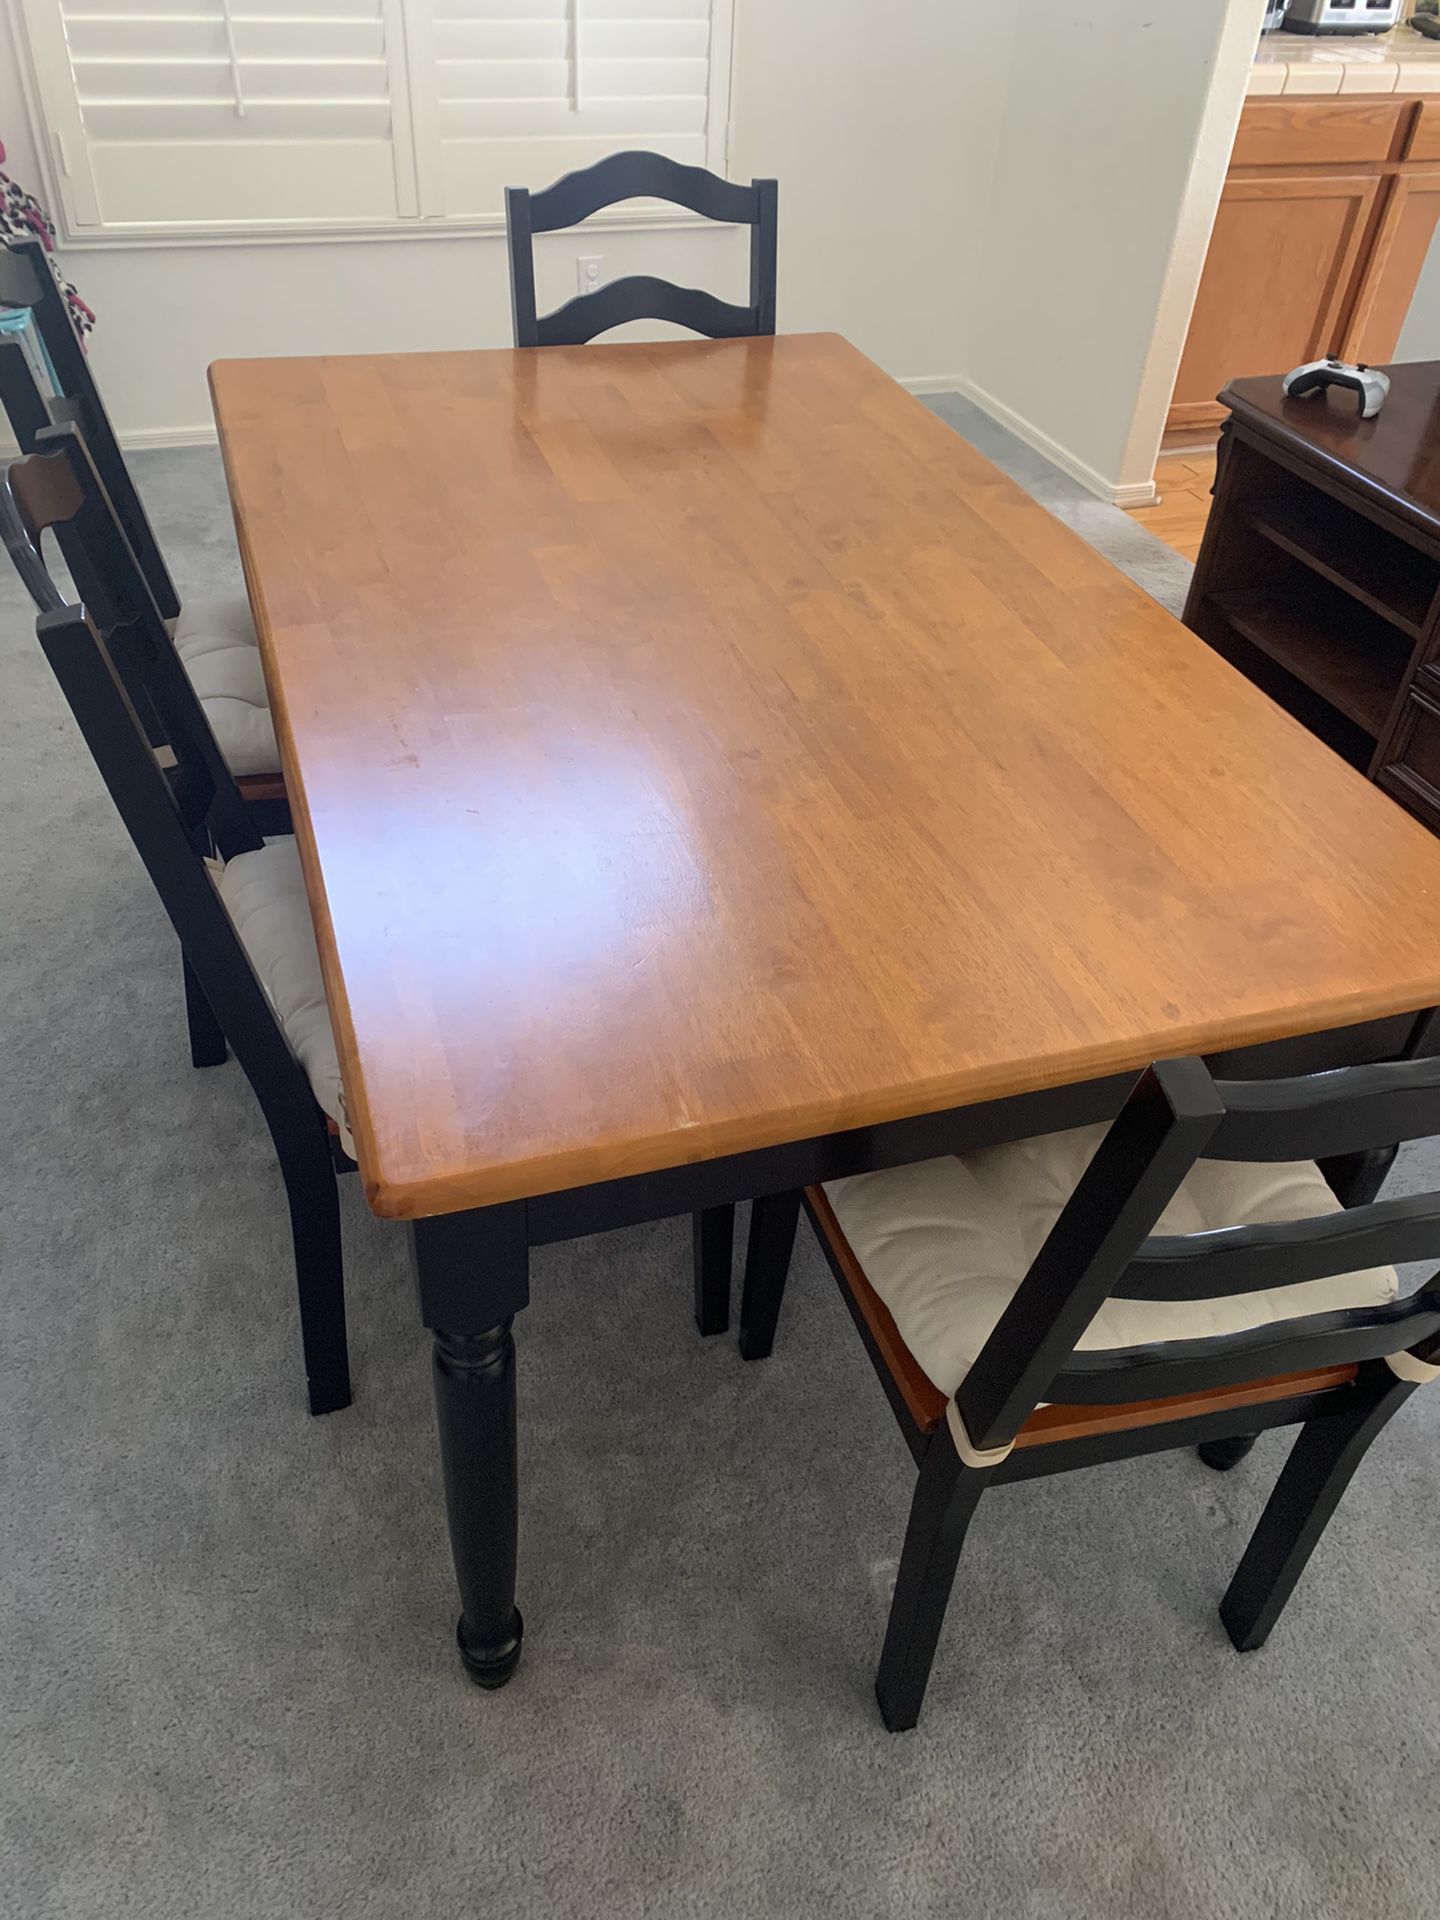 Dining kitchen table with chairs and pads